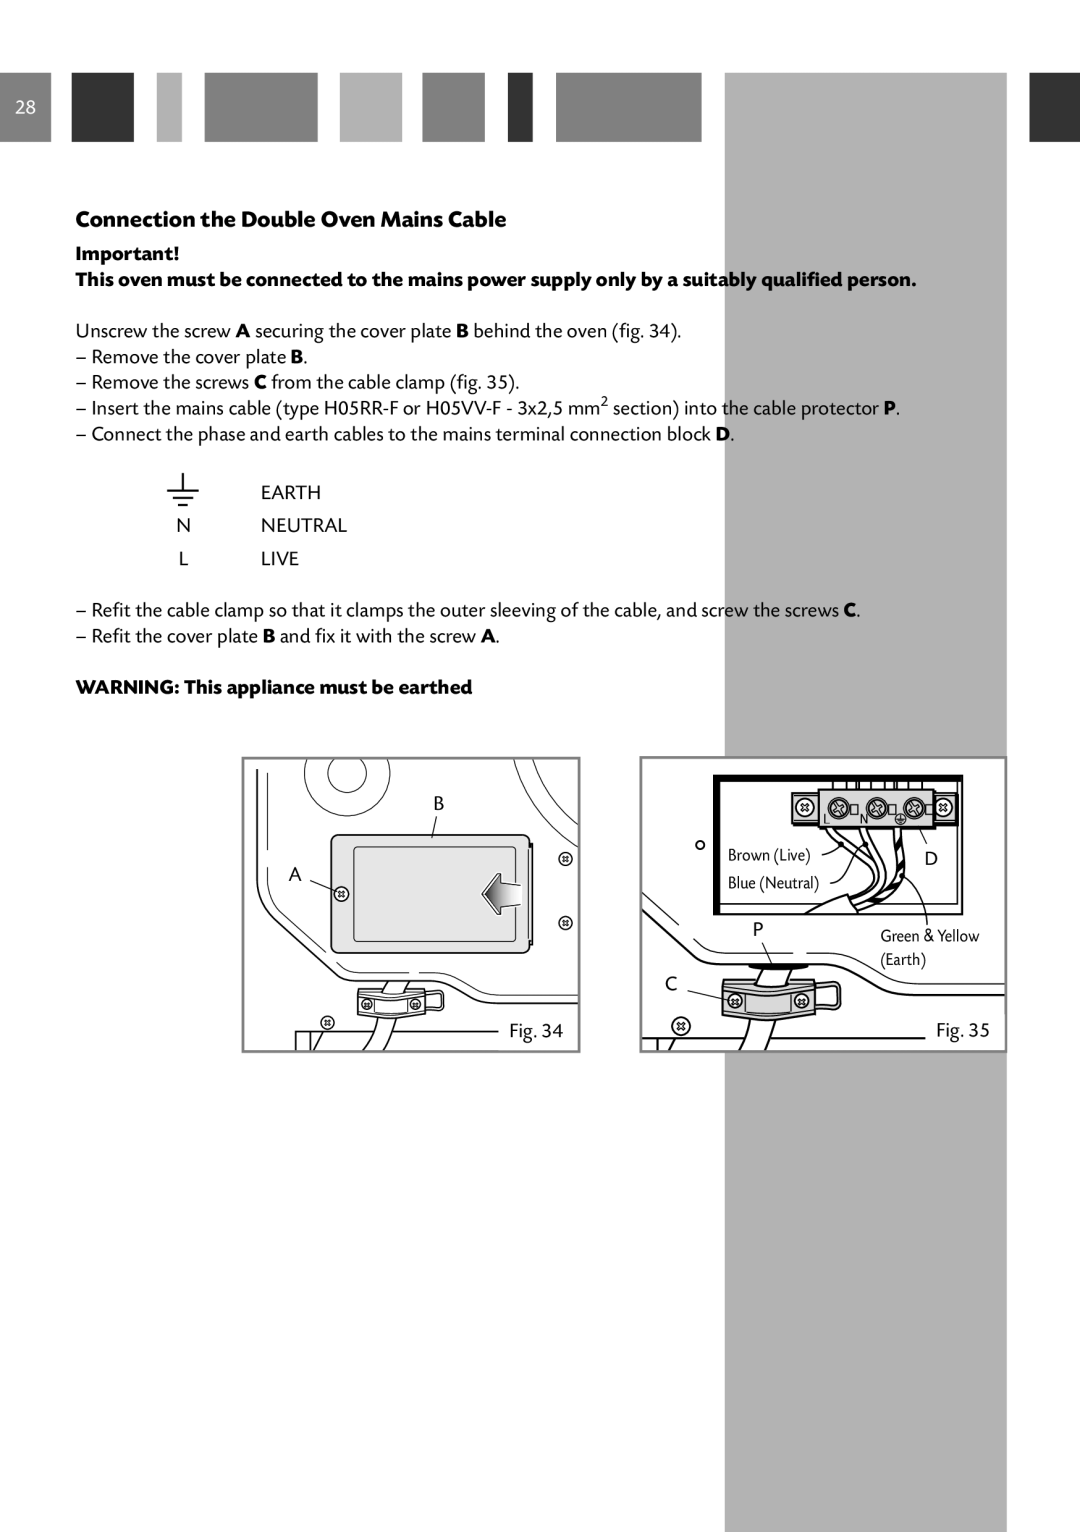 CDA DC930 manual Connection the Double Oven Mains Cable, WARNING This appliance must be earthed 